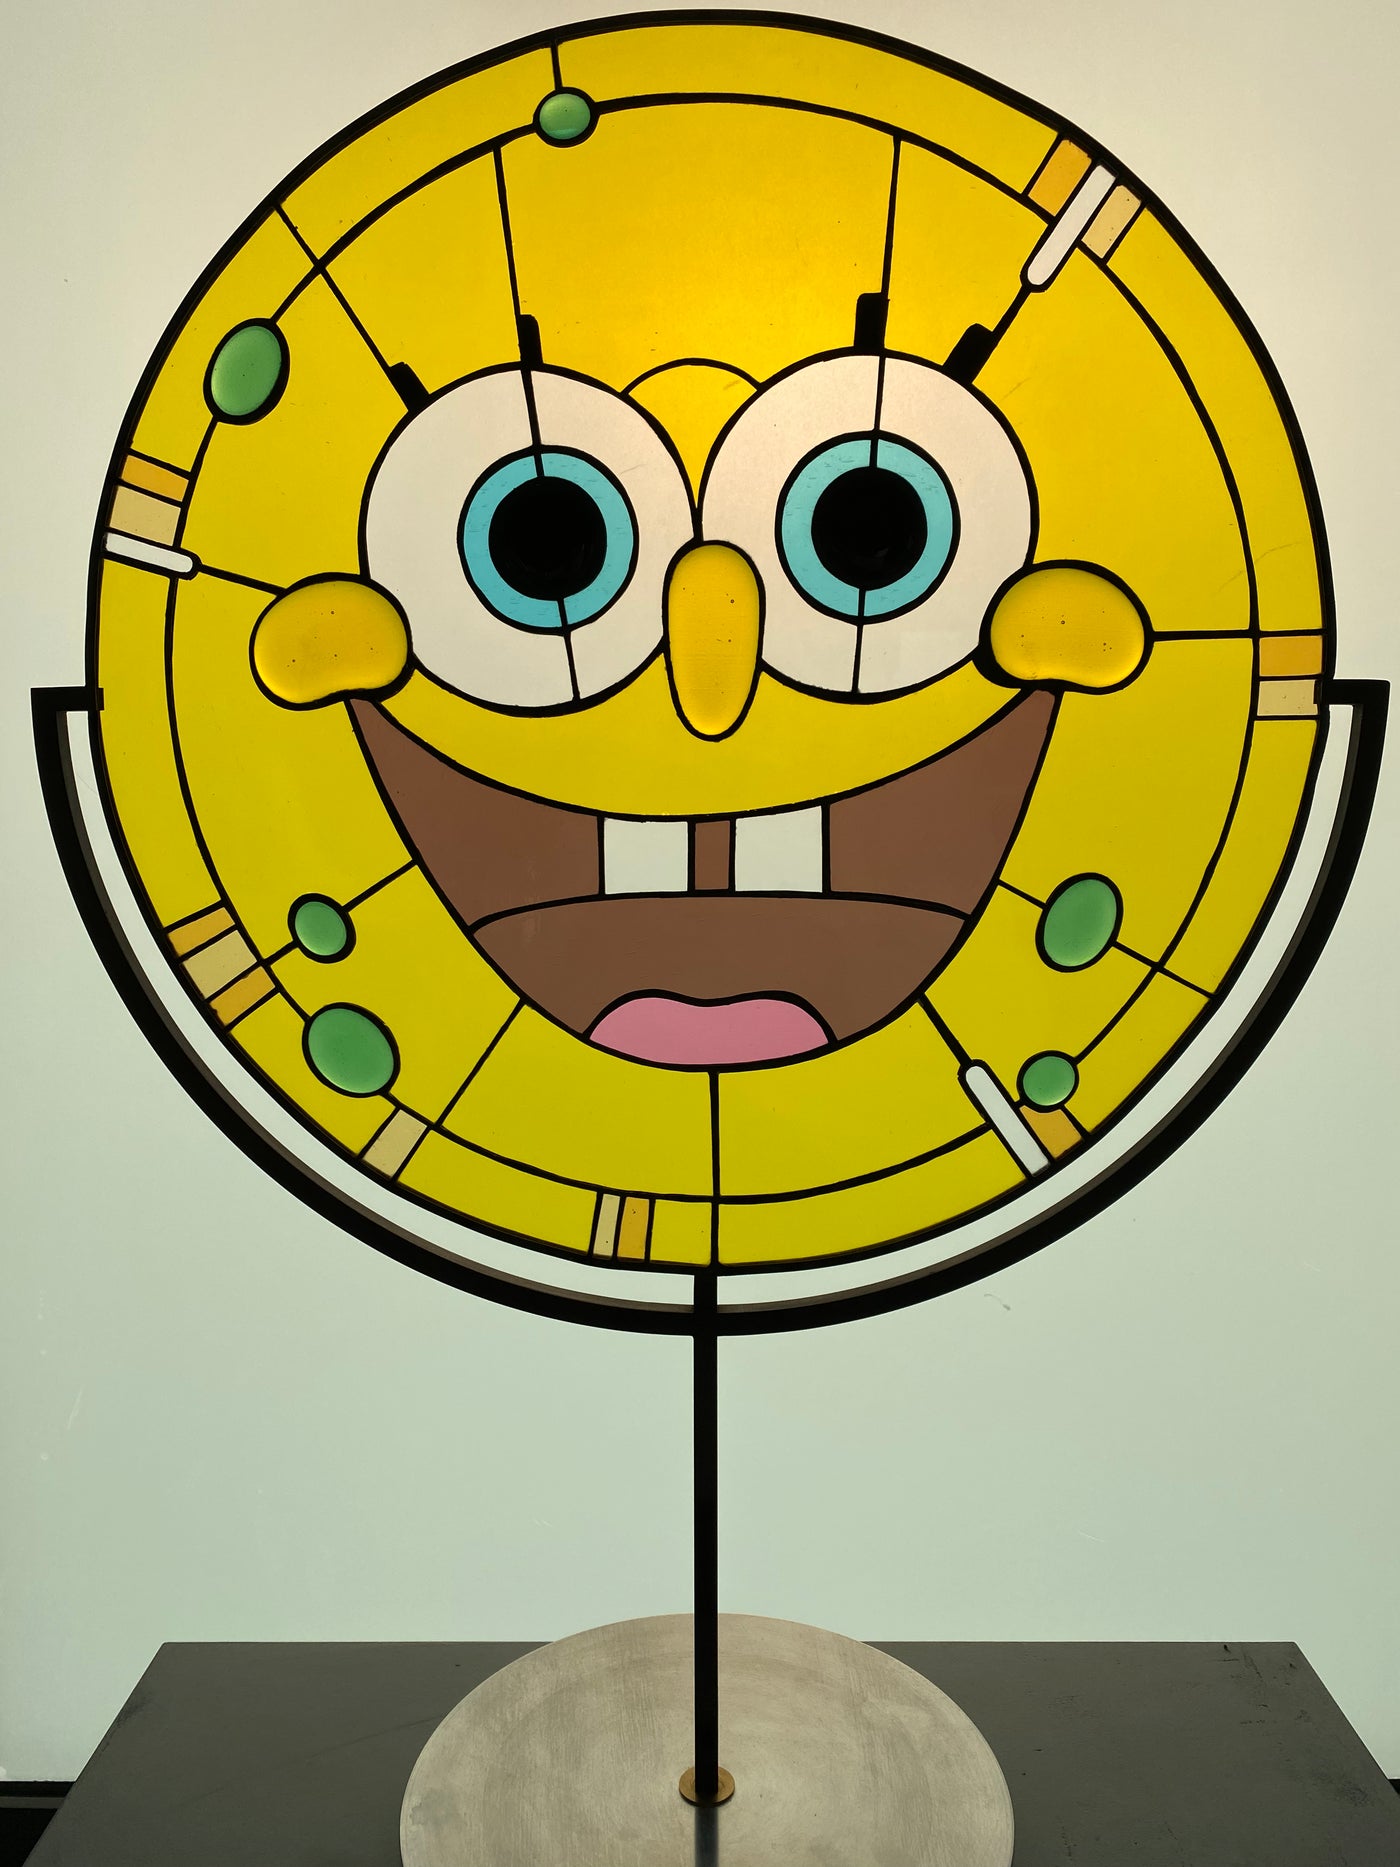 Spongebob Squarepants Inspired Round Stained Glass Art with Display Stand_1